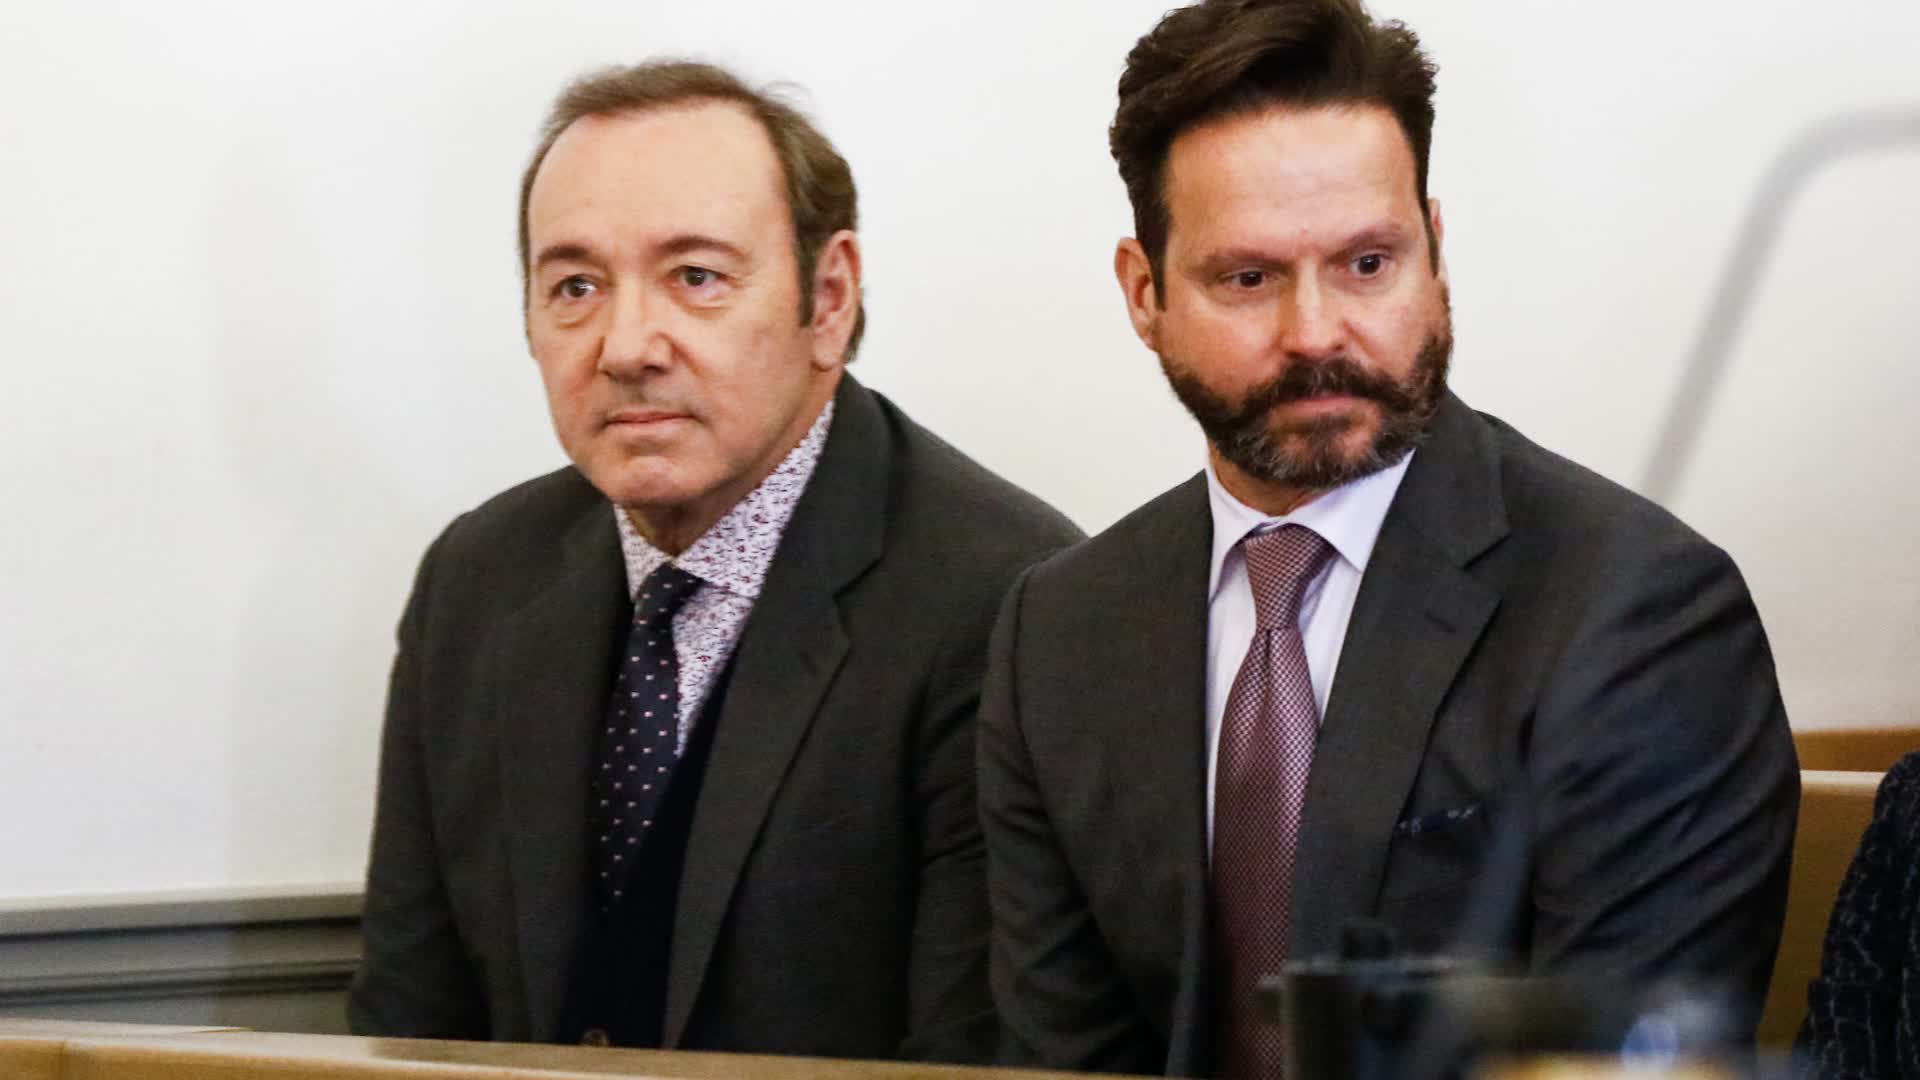 Kevin Spacey Goes to Court